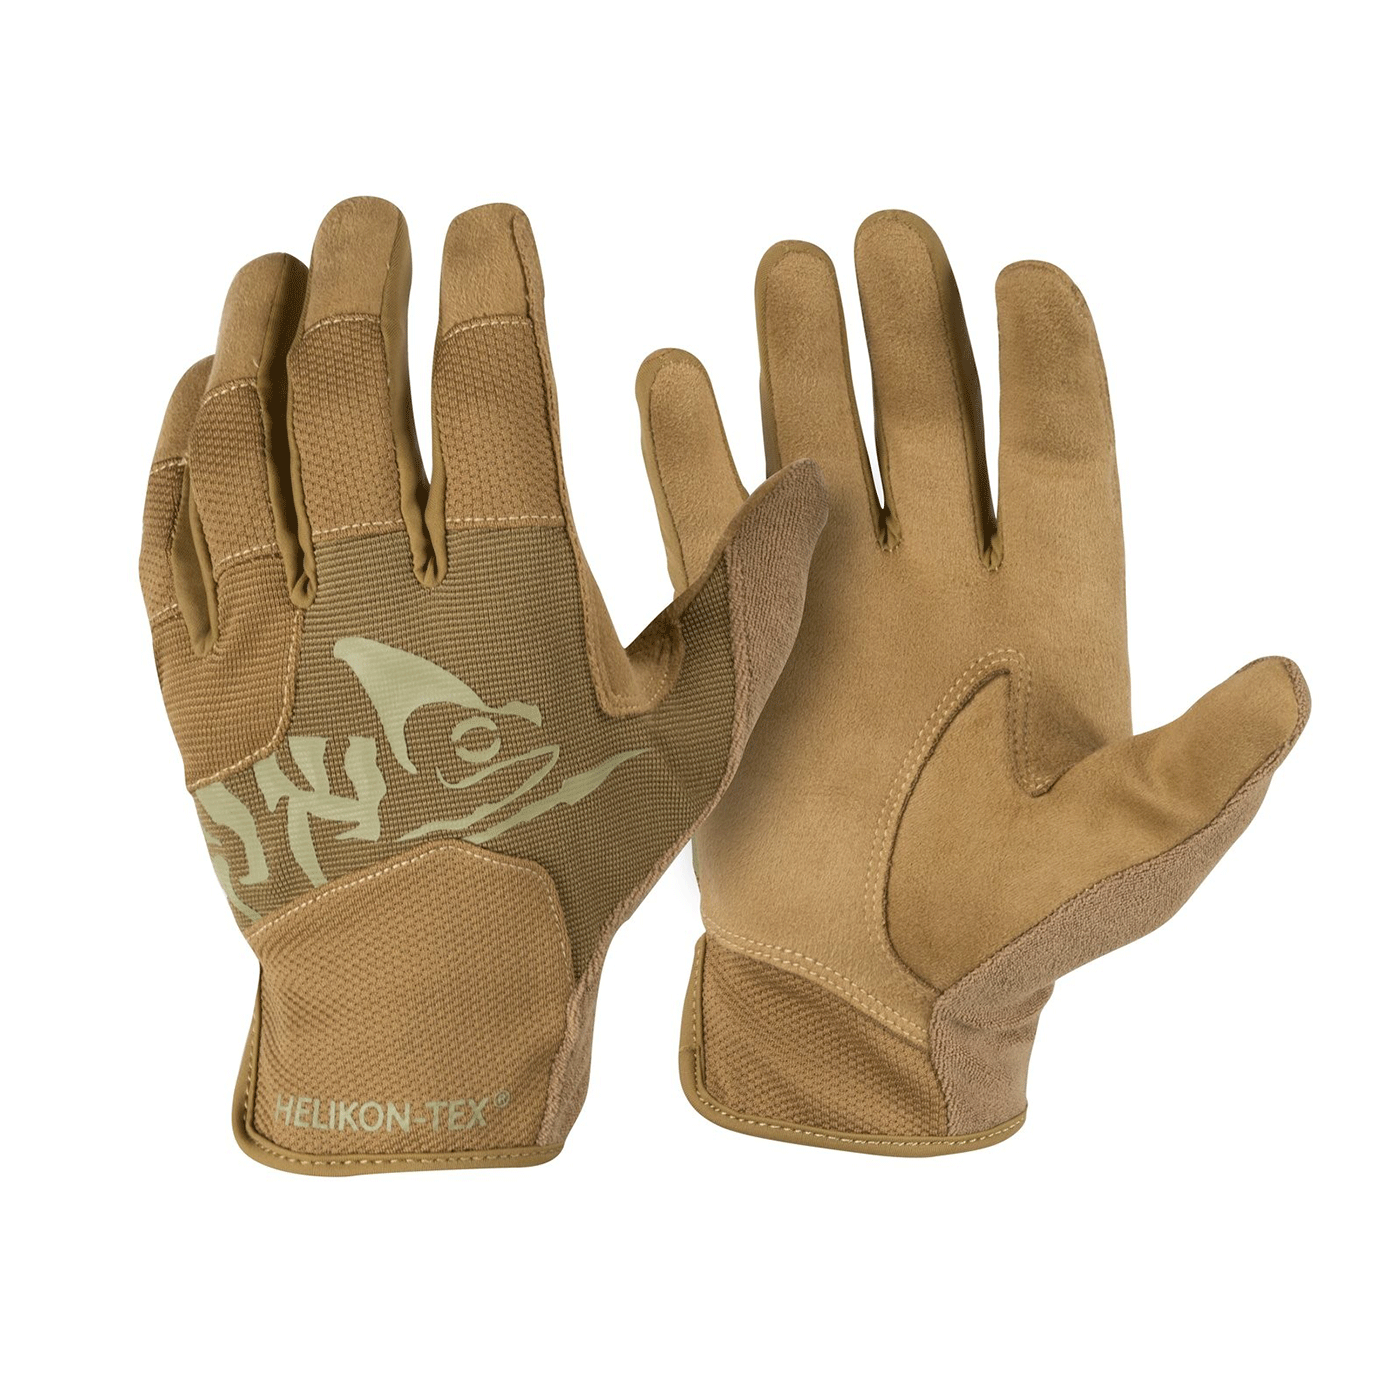 GLOVES - HELIKON-TEX - ALL ROUND FIT TACTICAL GLOVES Coyote / Adaptive Green A